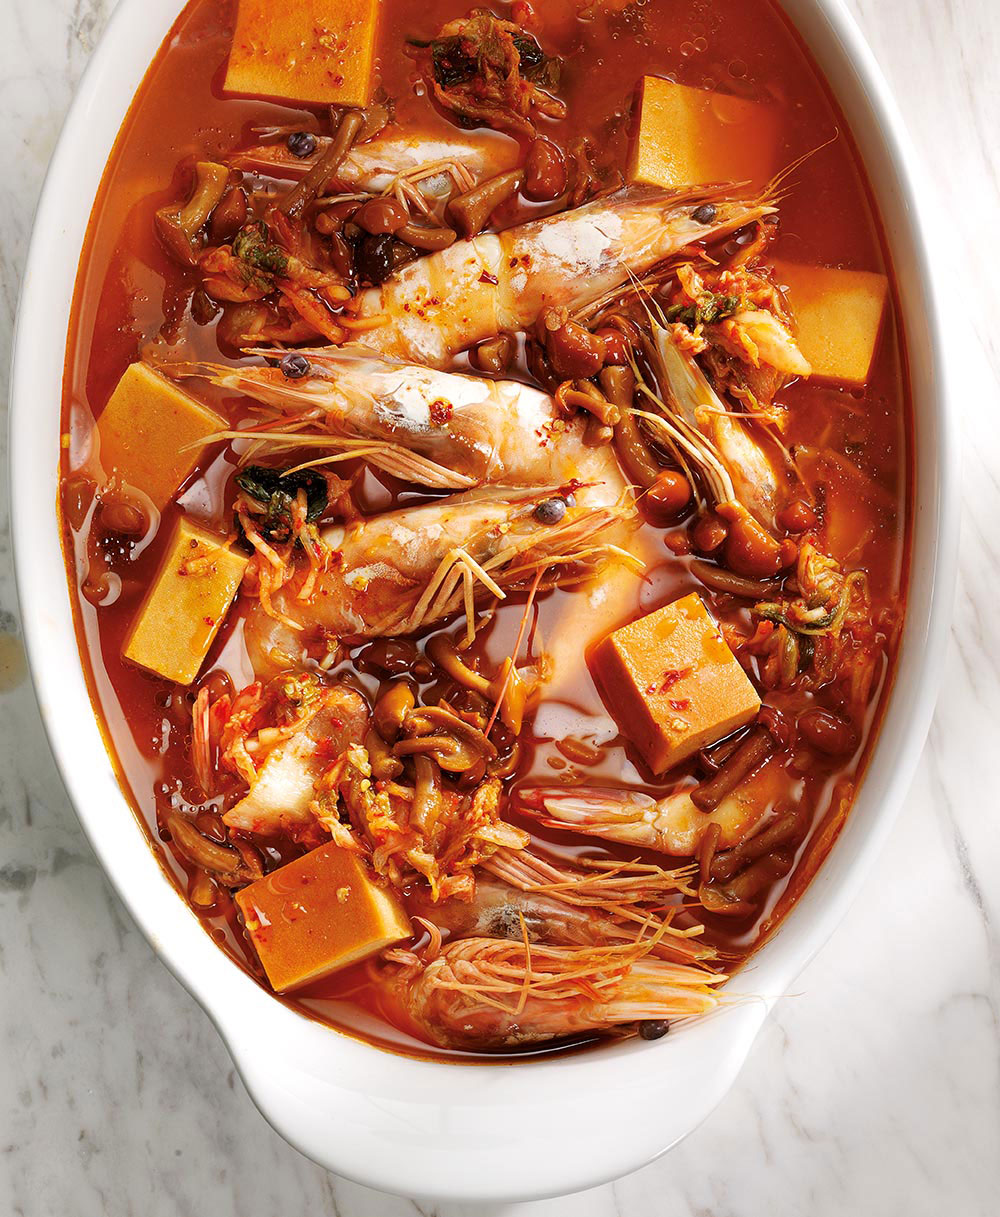 Spicy kimchi soup with grilled prawns, tofu & mushrooms.